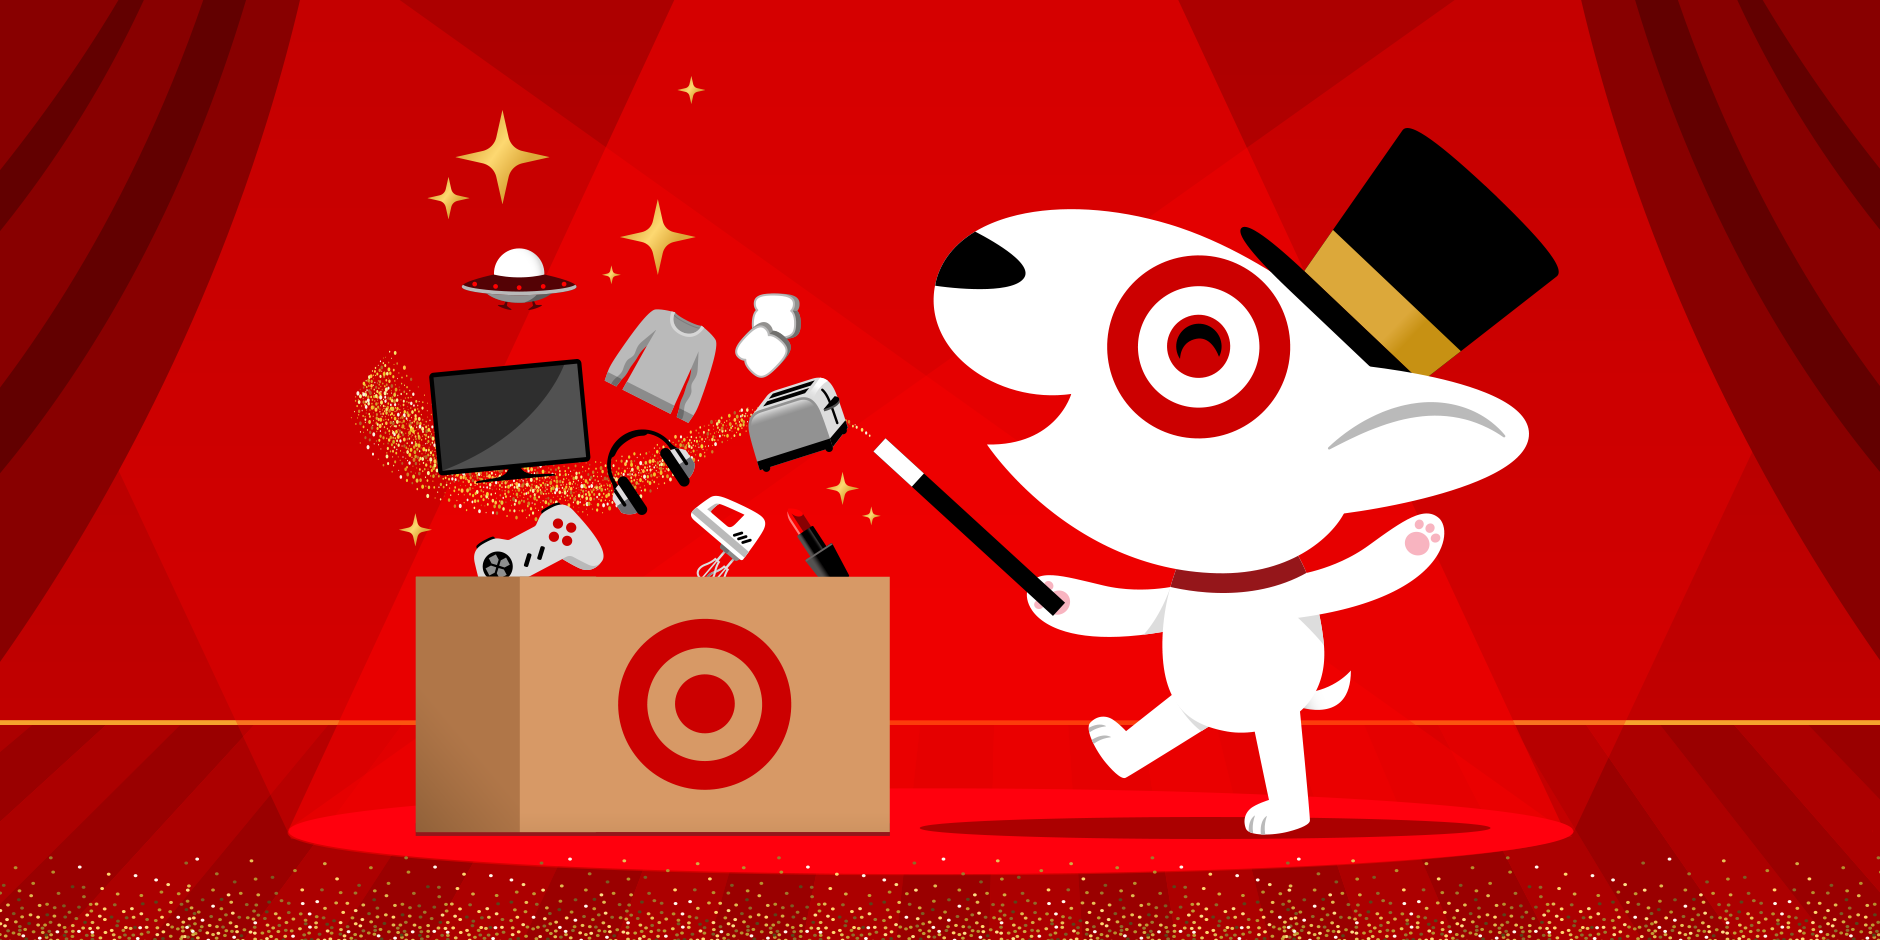 Walmart and Target announce sales events to counter Amazon Prime Day